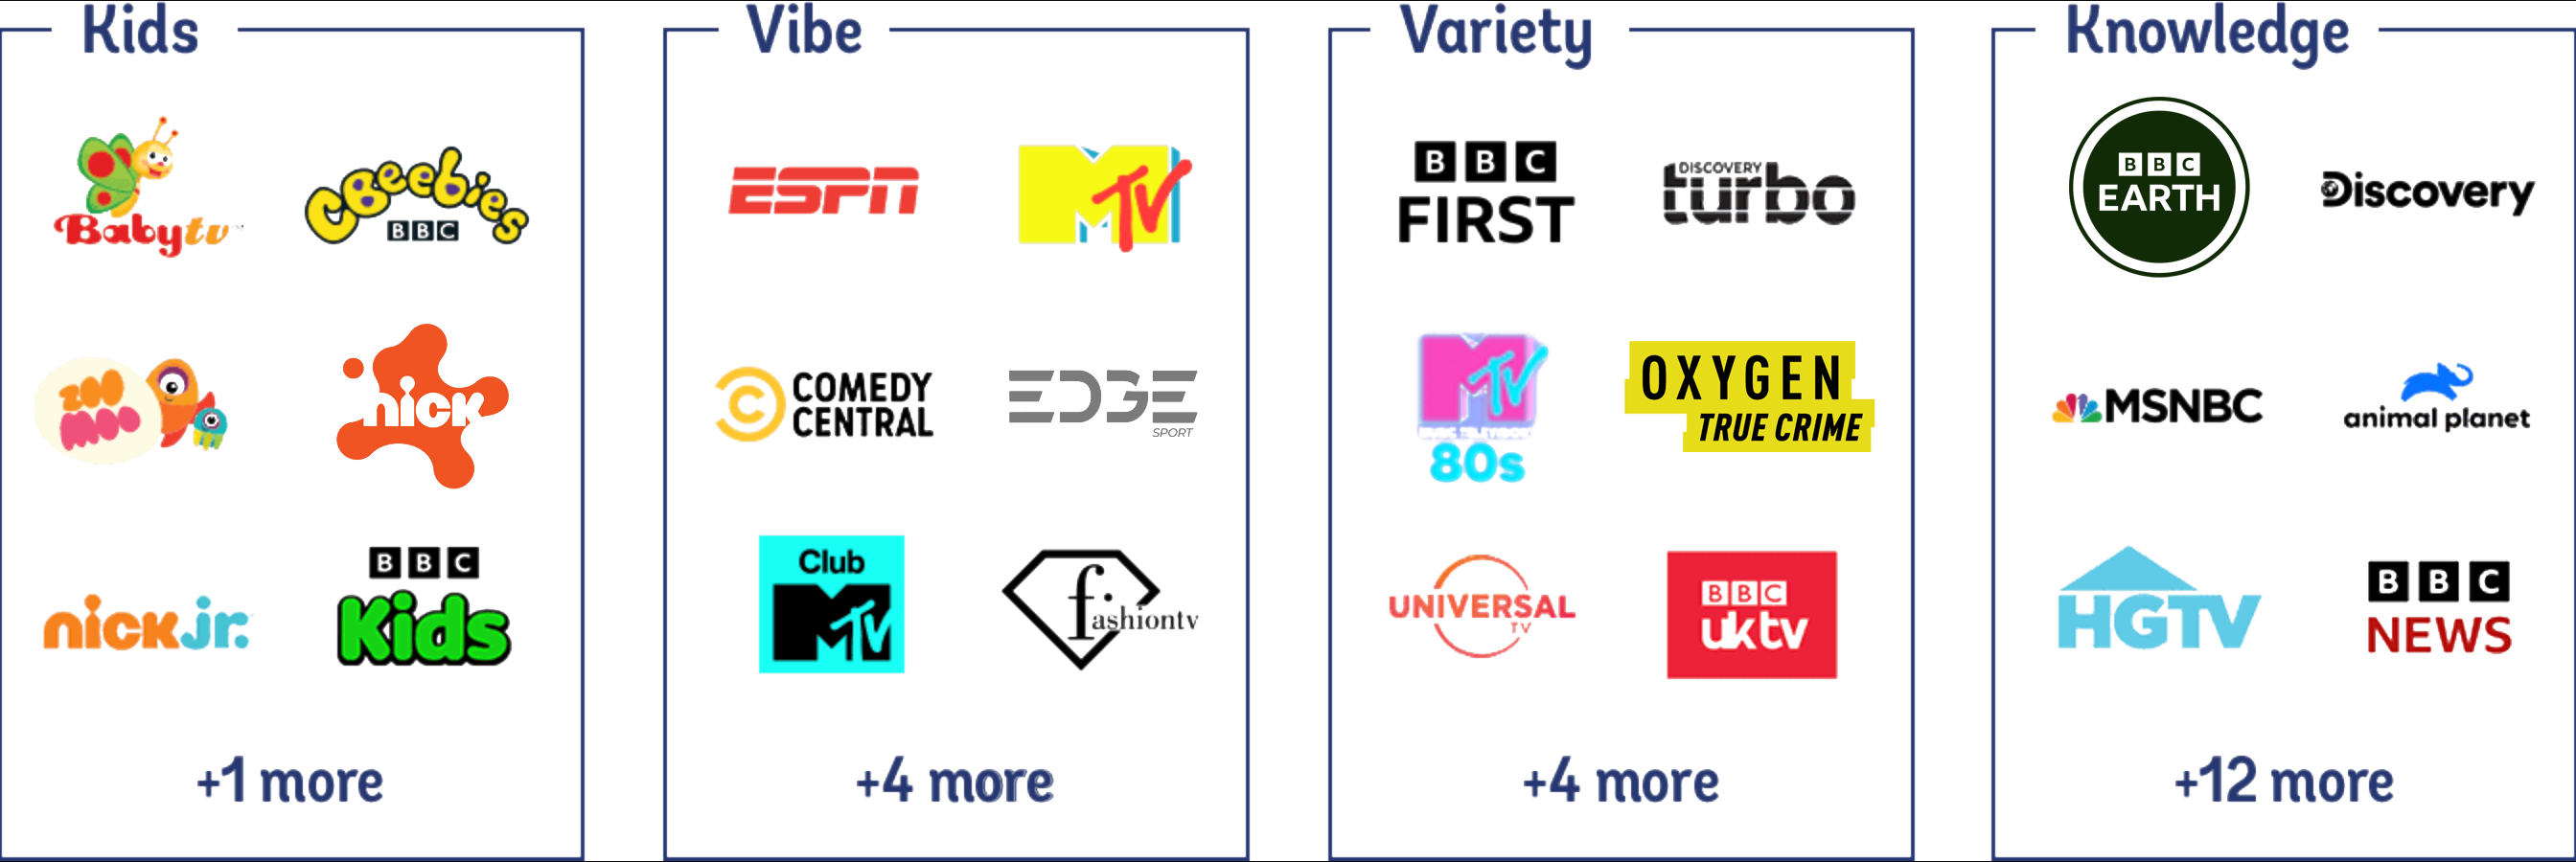 Some of the channels in the Kids, Vibe, Variety, and Knowledge packs